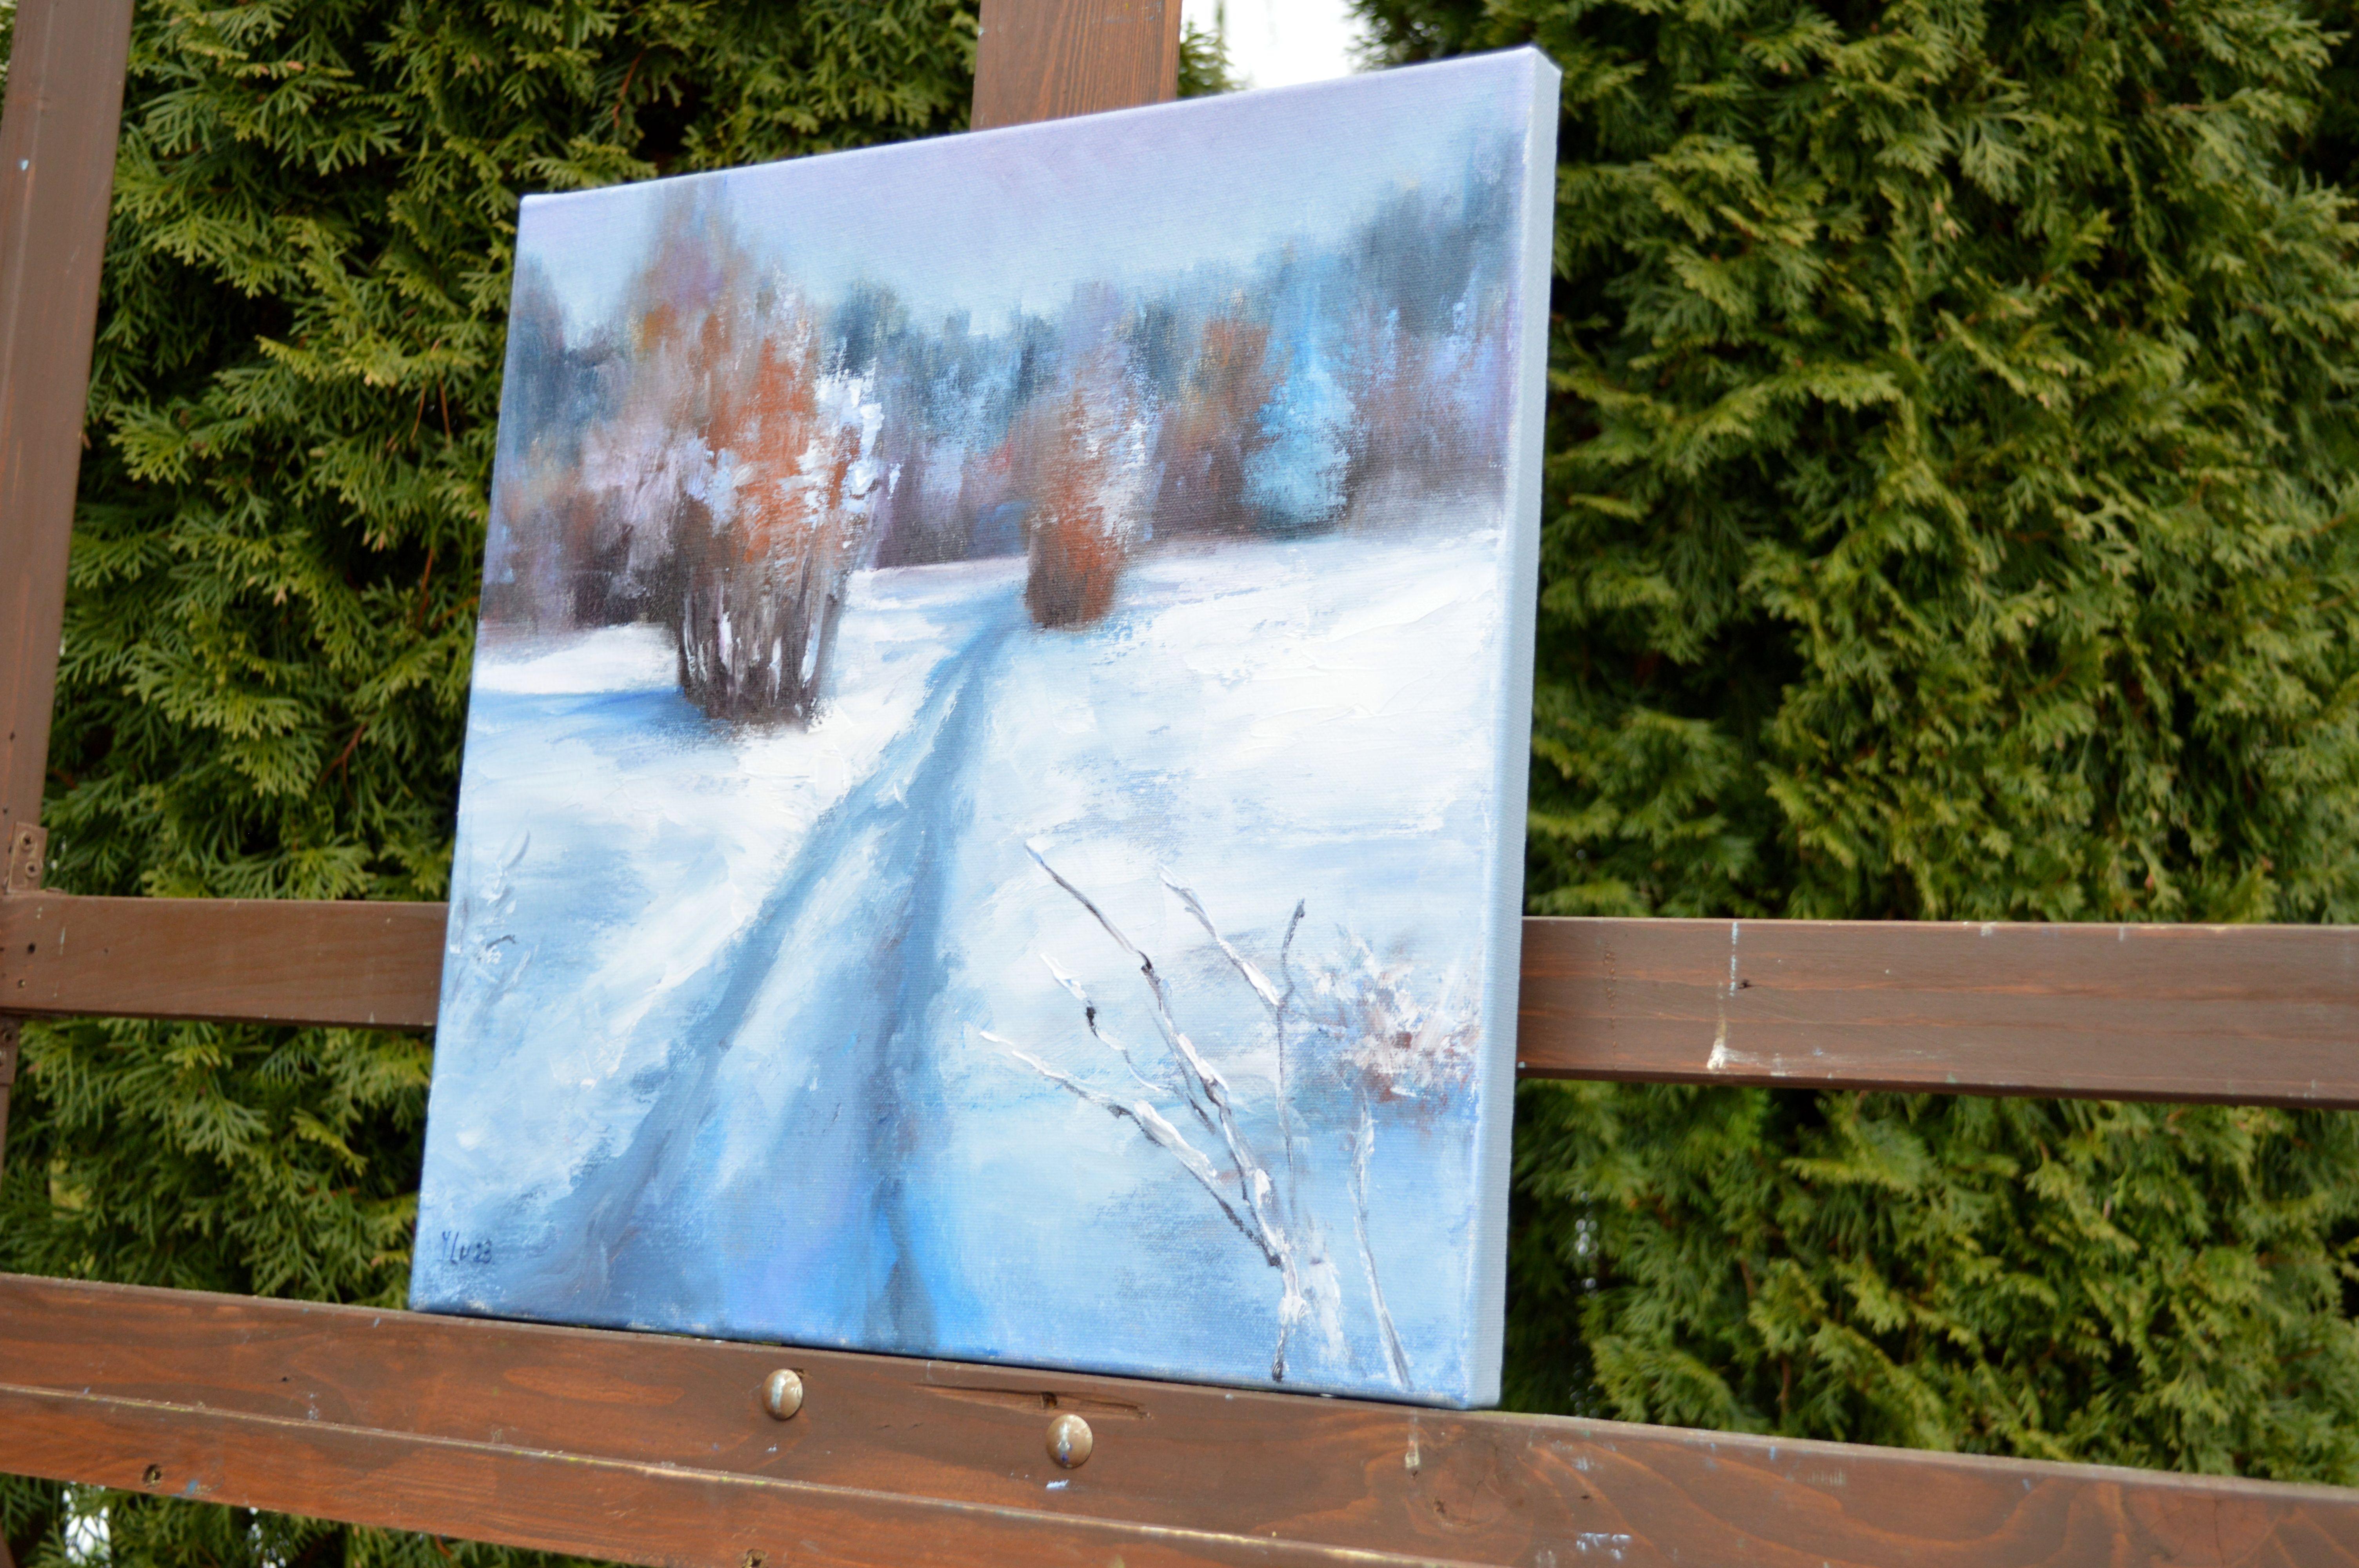 In my oil painting, I sought to capture the serene essence of a winter's journey. I employed a blend of expressionism and impressionism to convey the chill and introspection that snowy landscapes evoke. Working the canvas, I envisioned the path as a